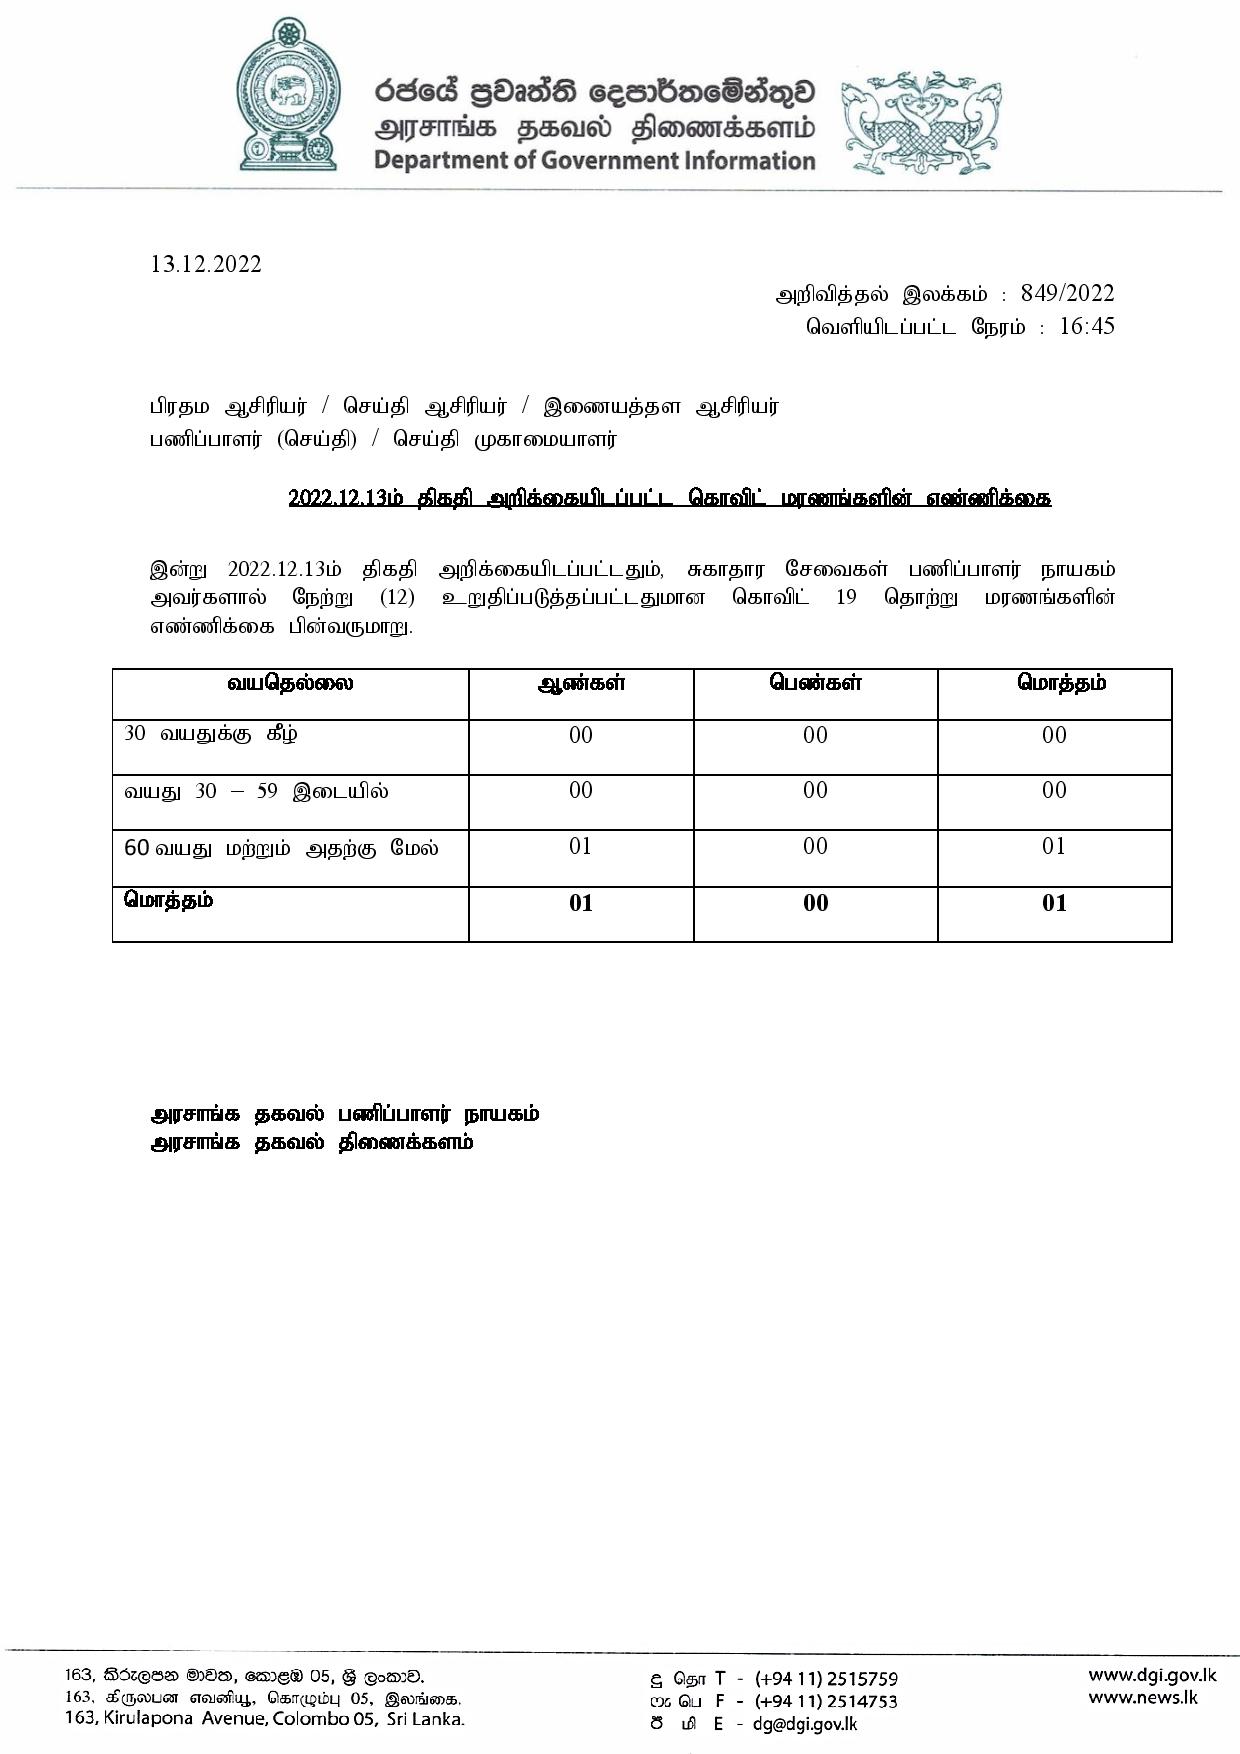 Press Release 849 Tamil page 001